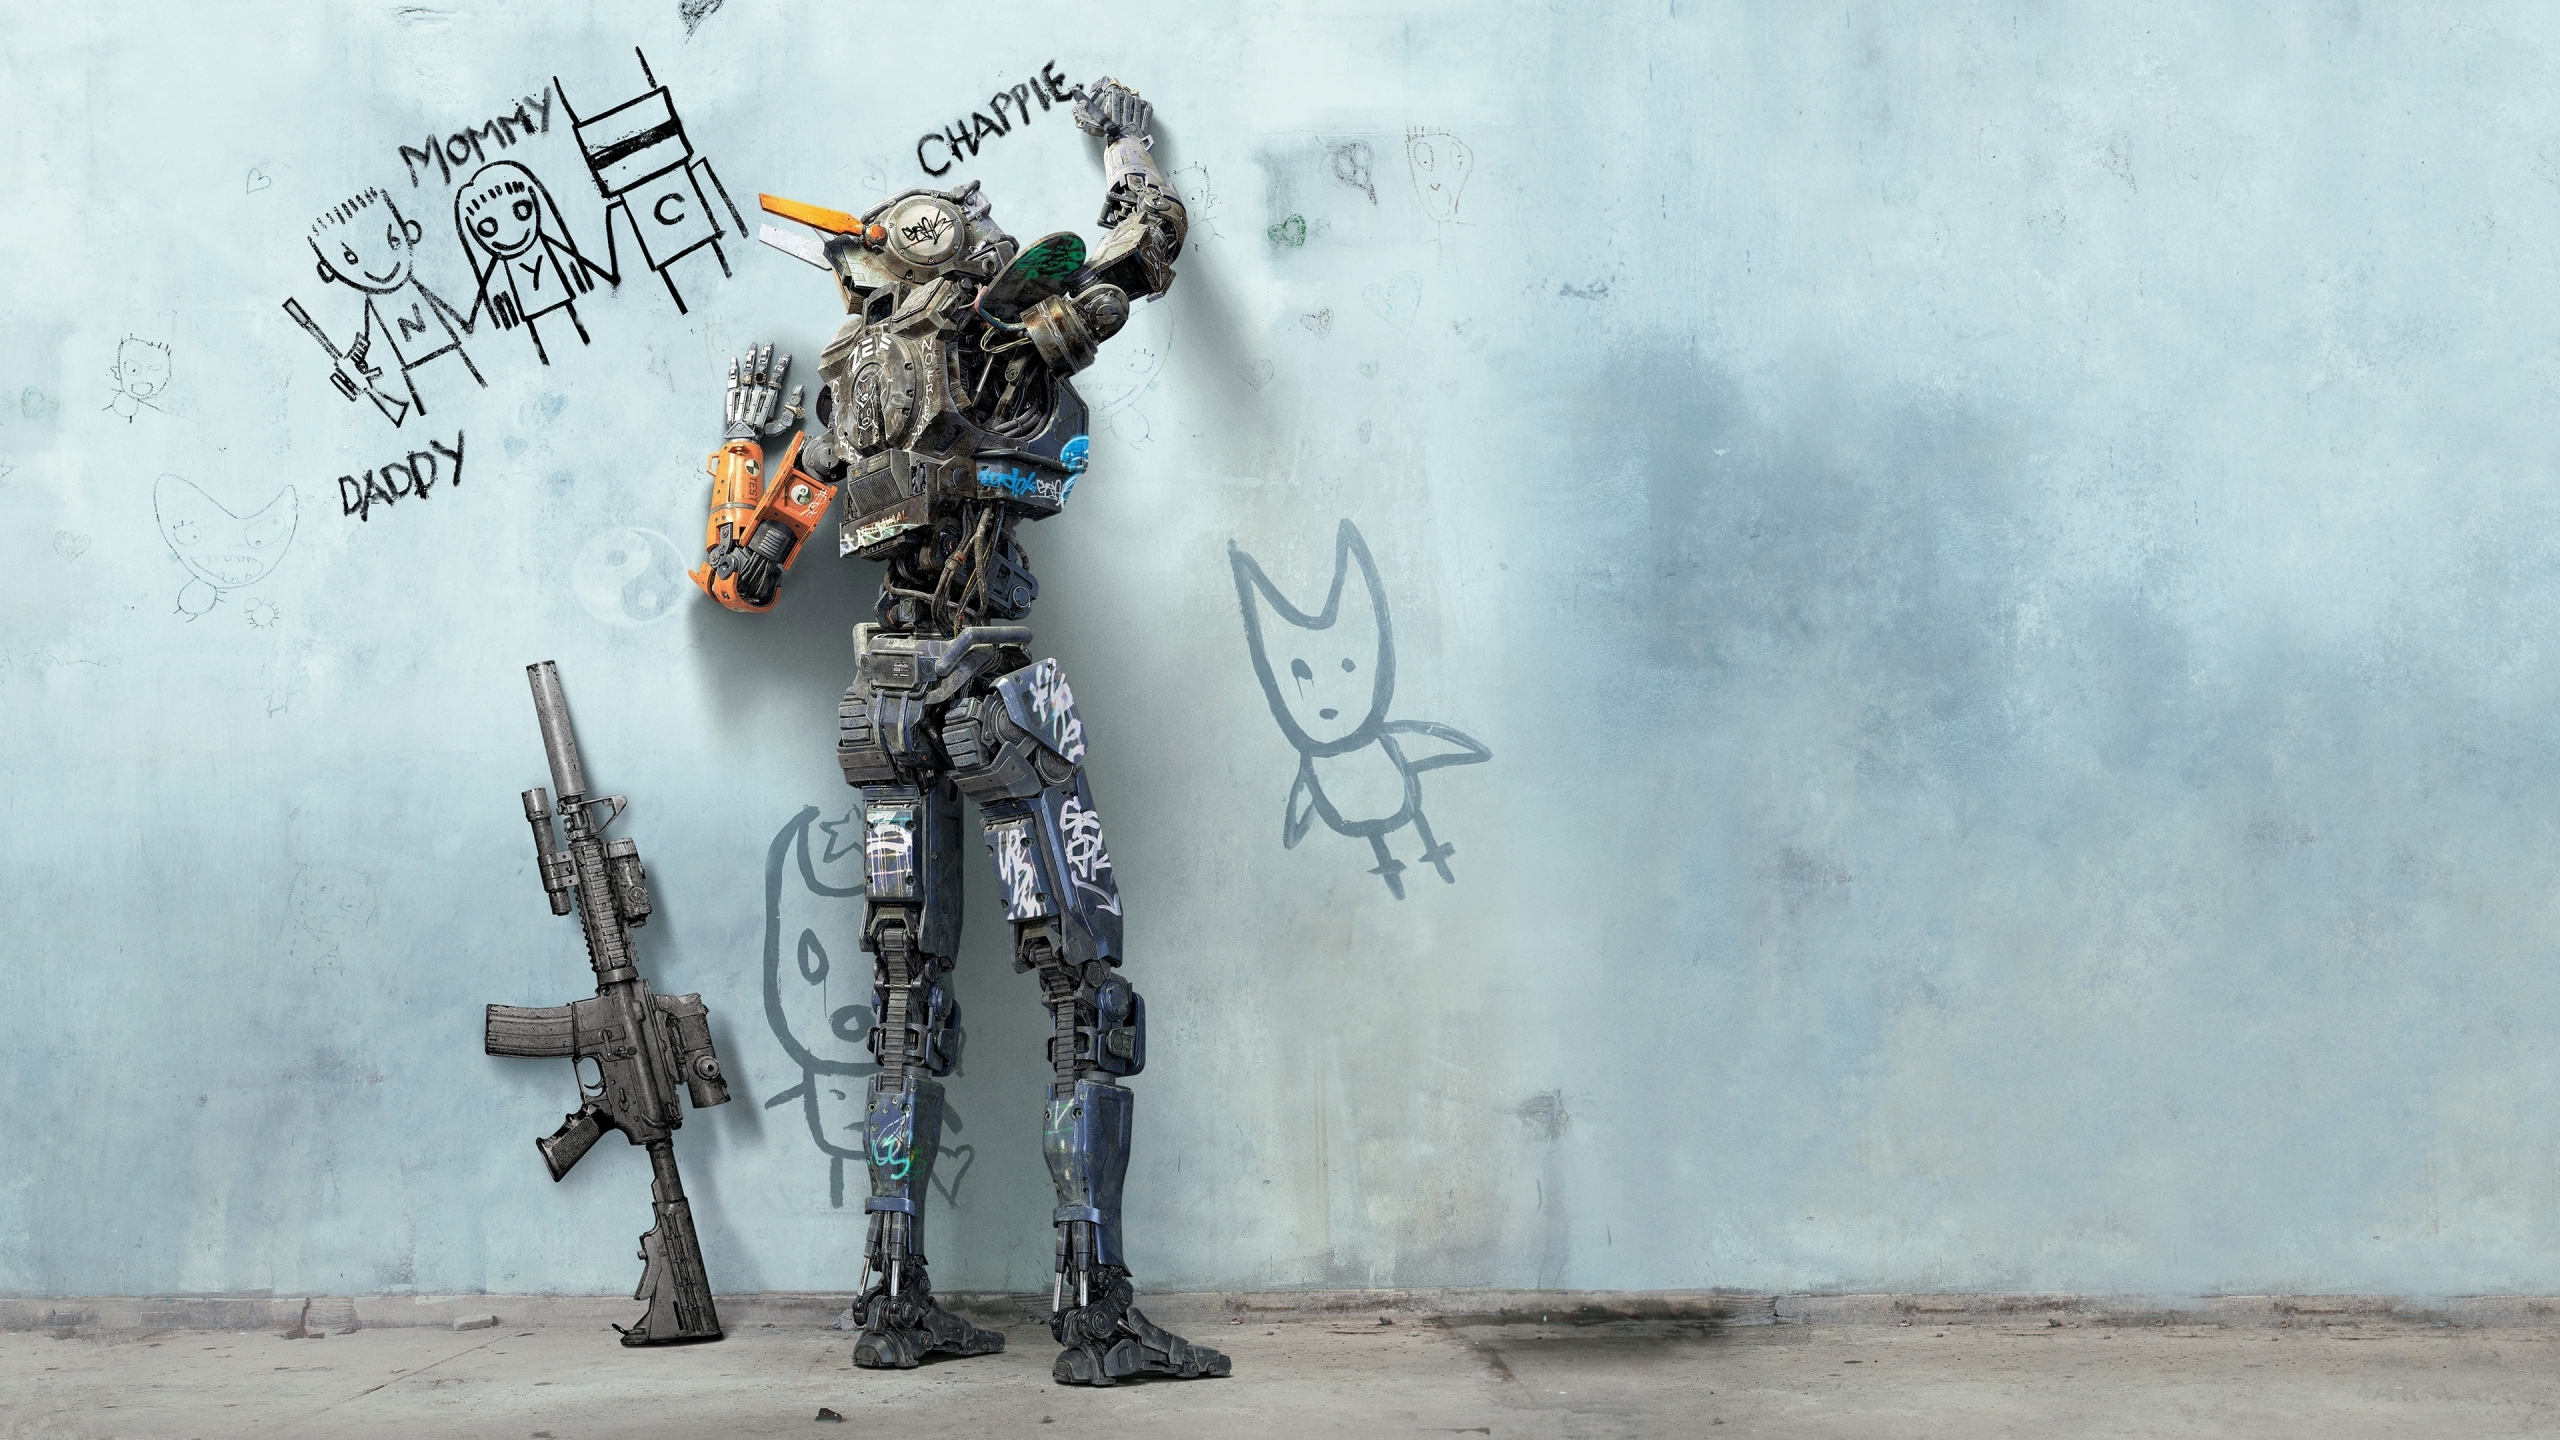 Chappie Movie 2015 for 2560x1440 HDTV resolution